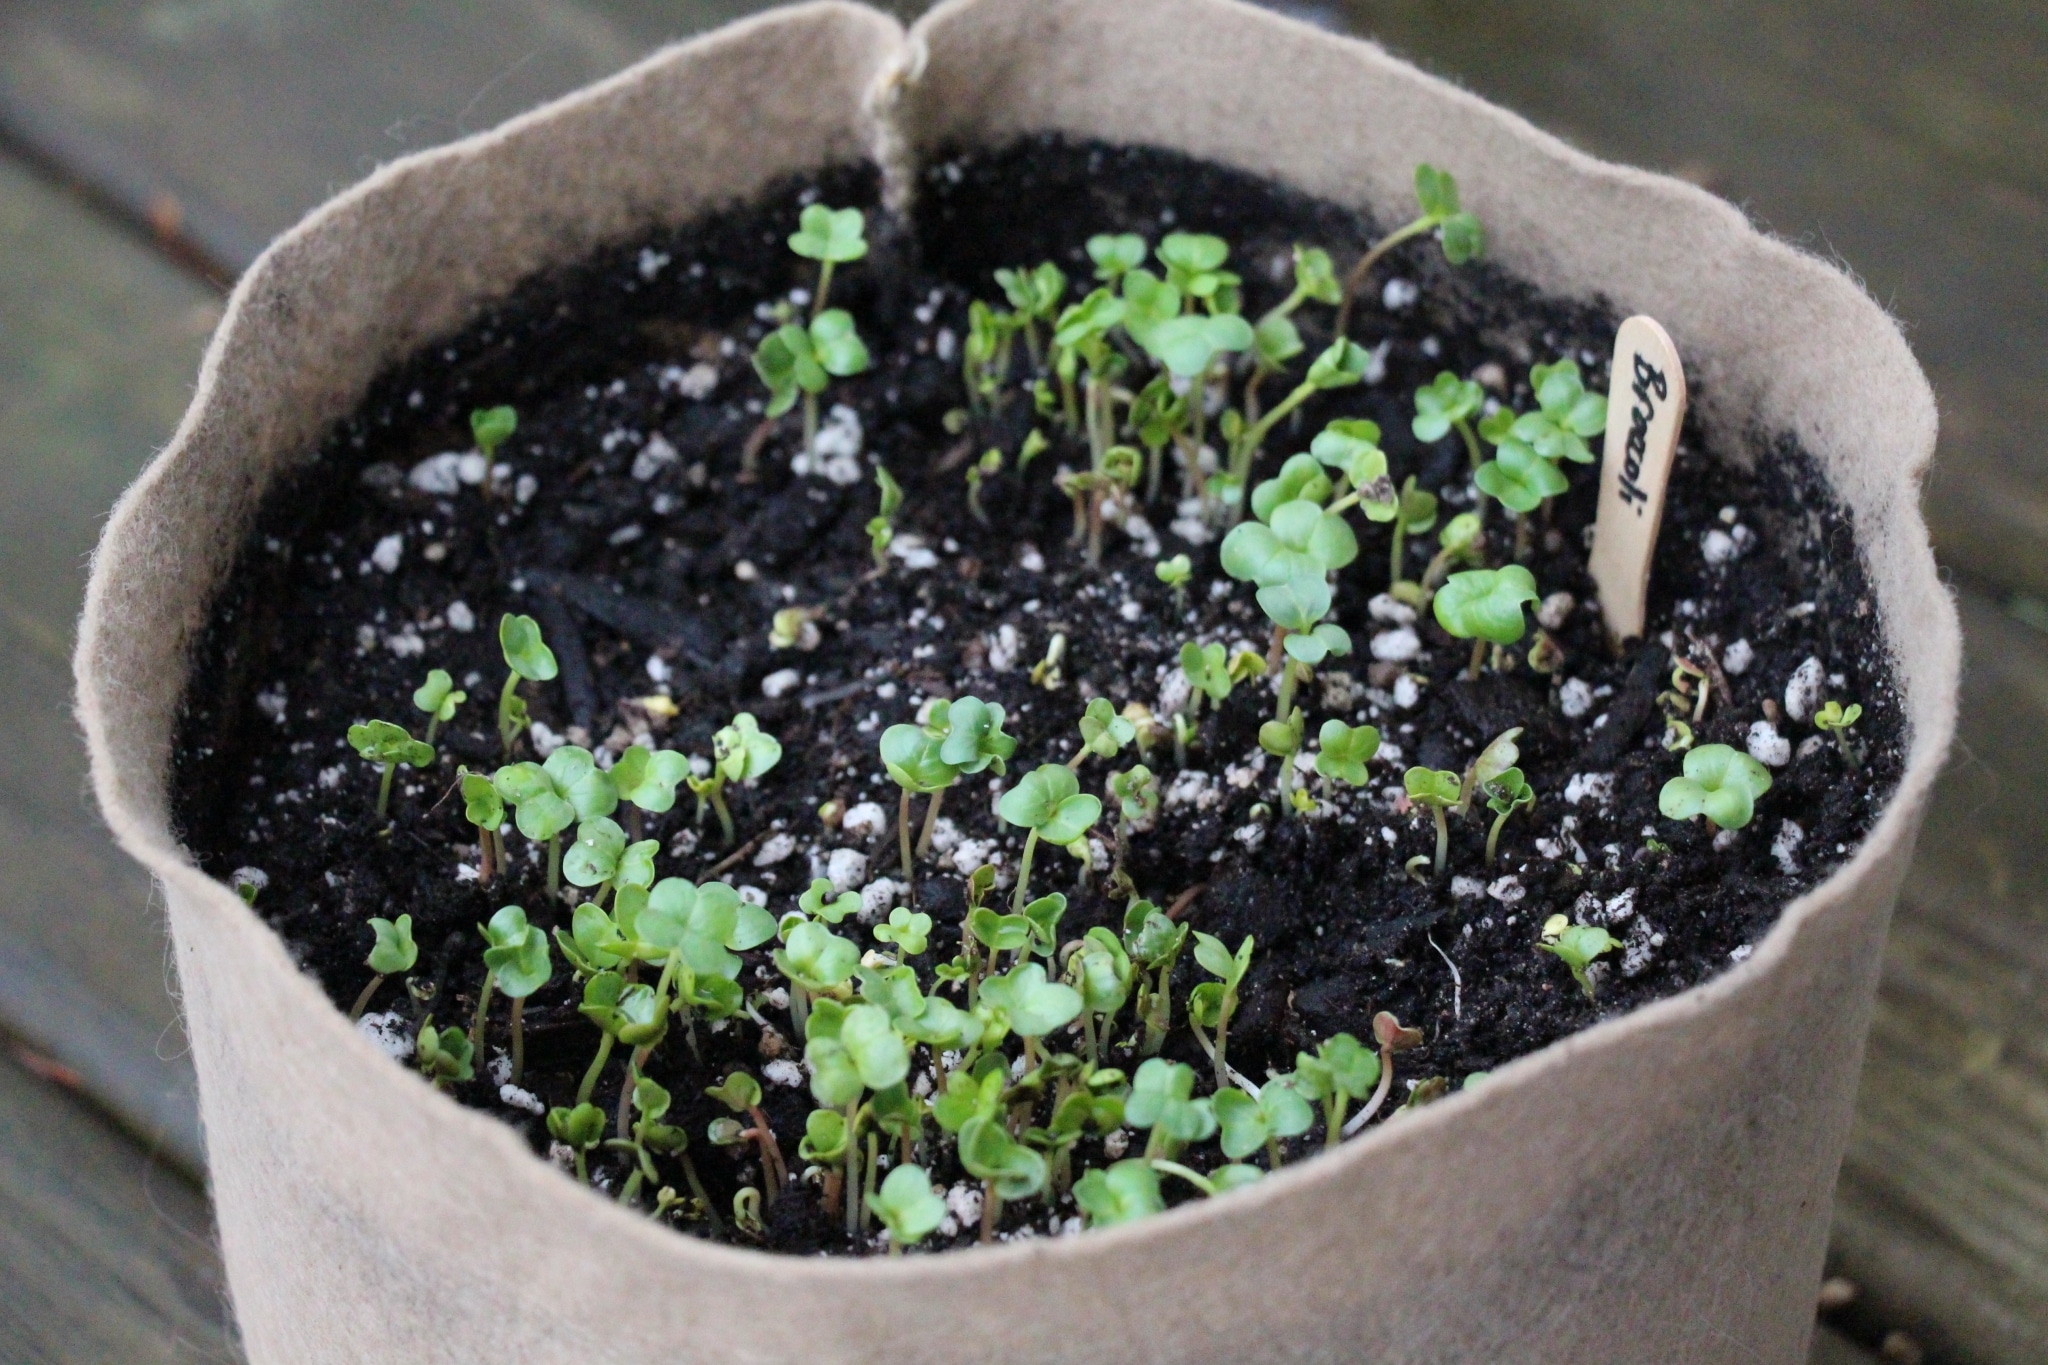 Planting seeds in Smart Pot containers for healthy growth